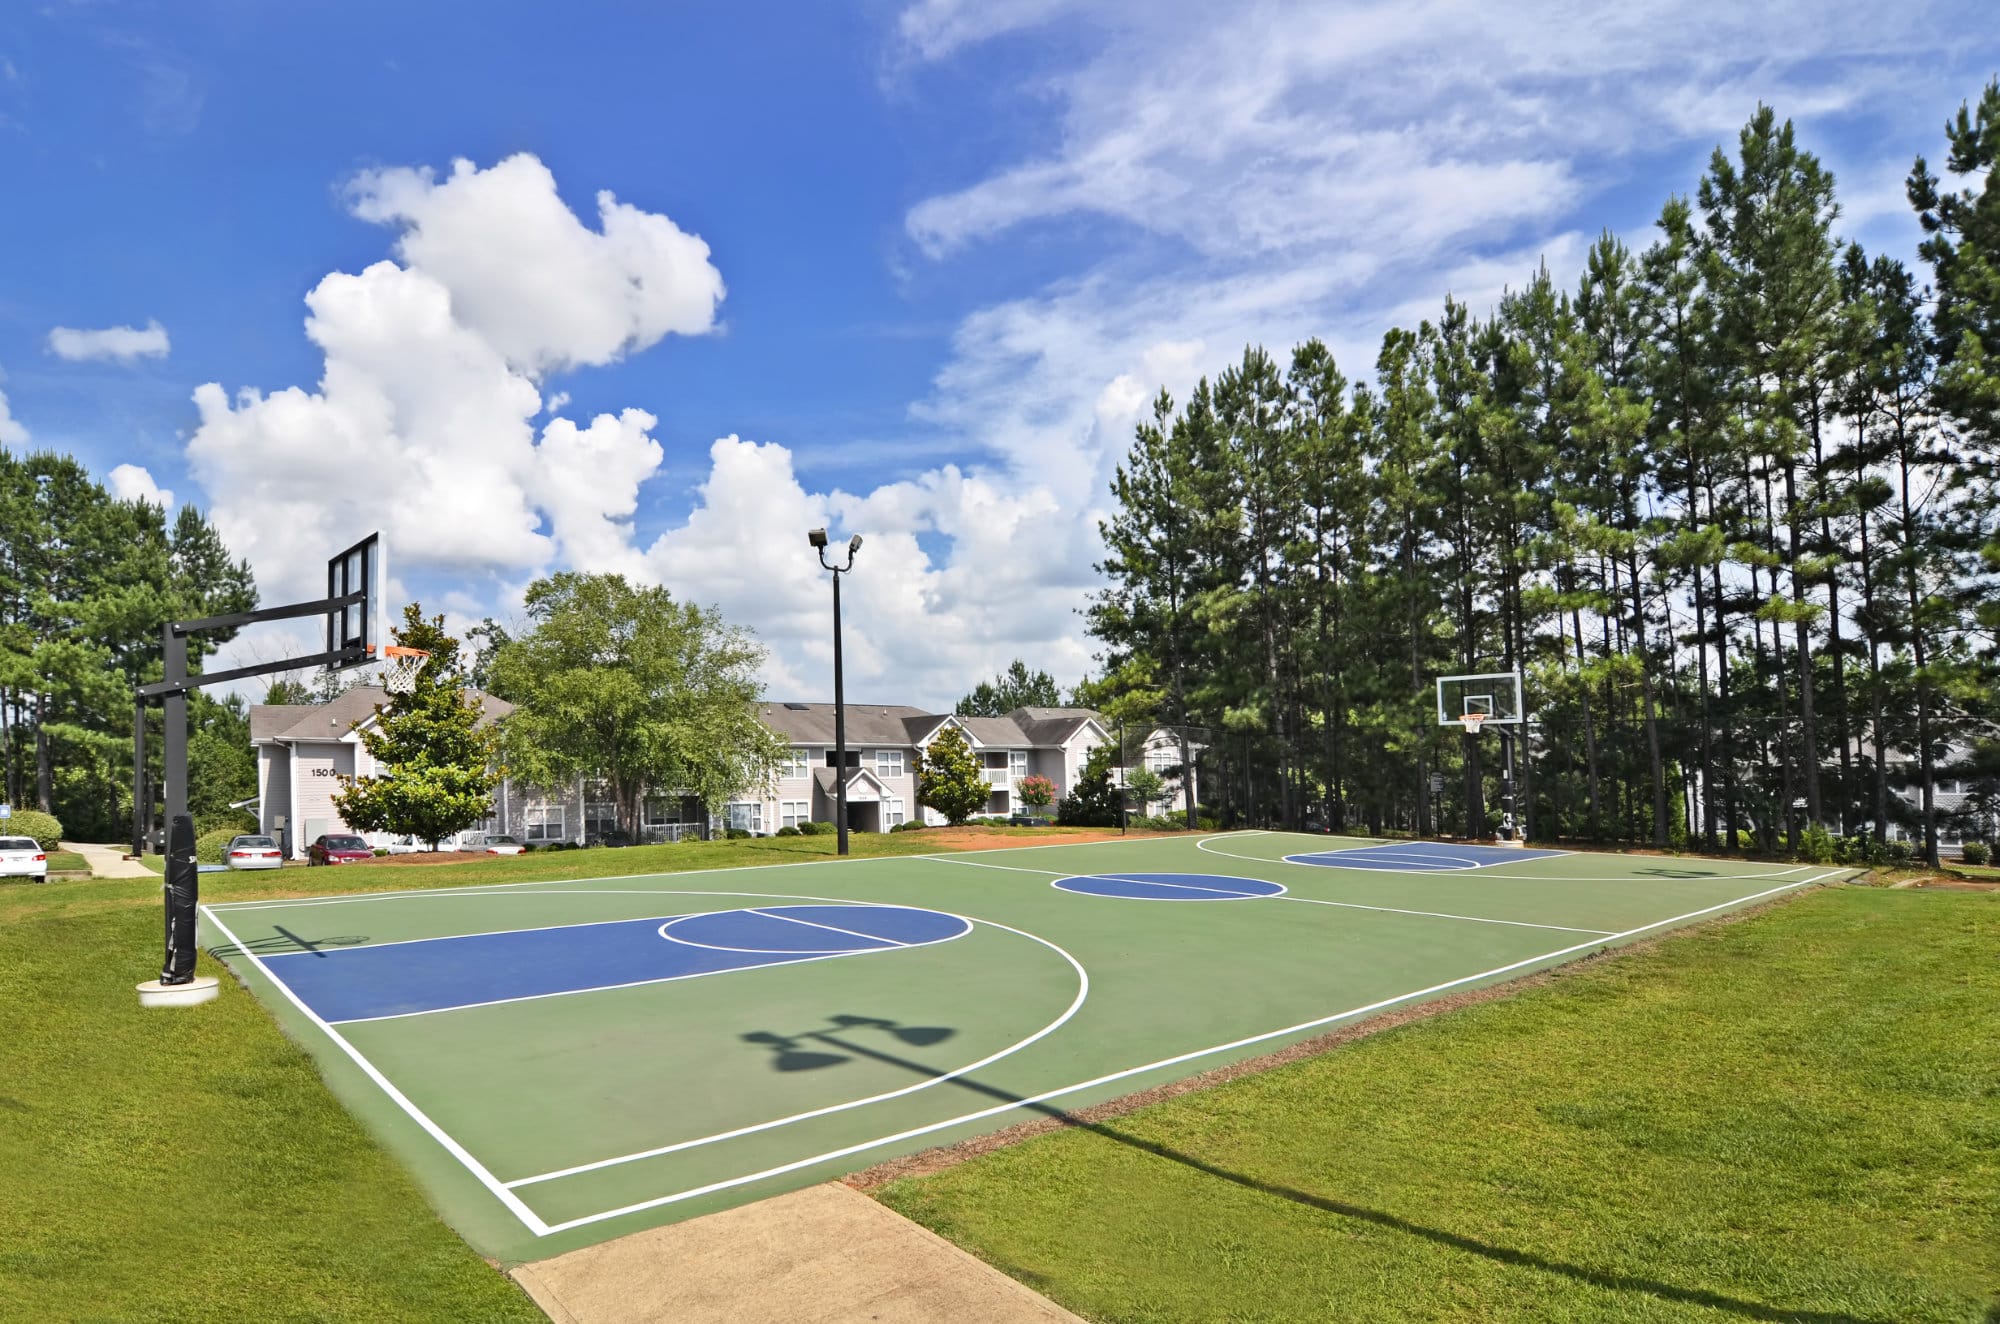 river-club-athens-the-townhomes-at-river-club-off-campus-apartments-near-the-university-of-georgia-basketball-court